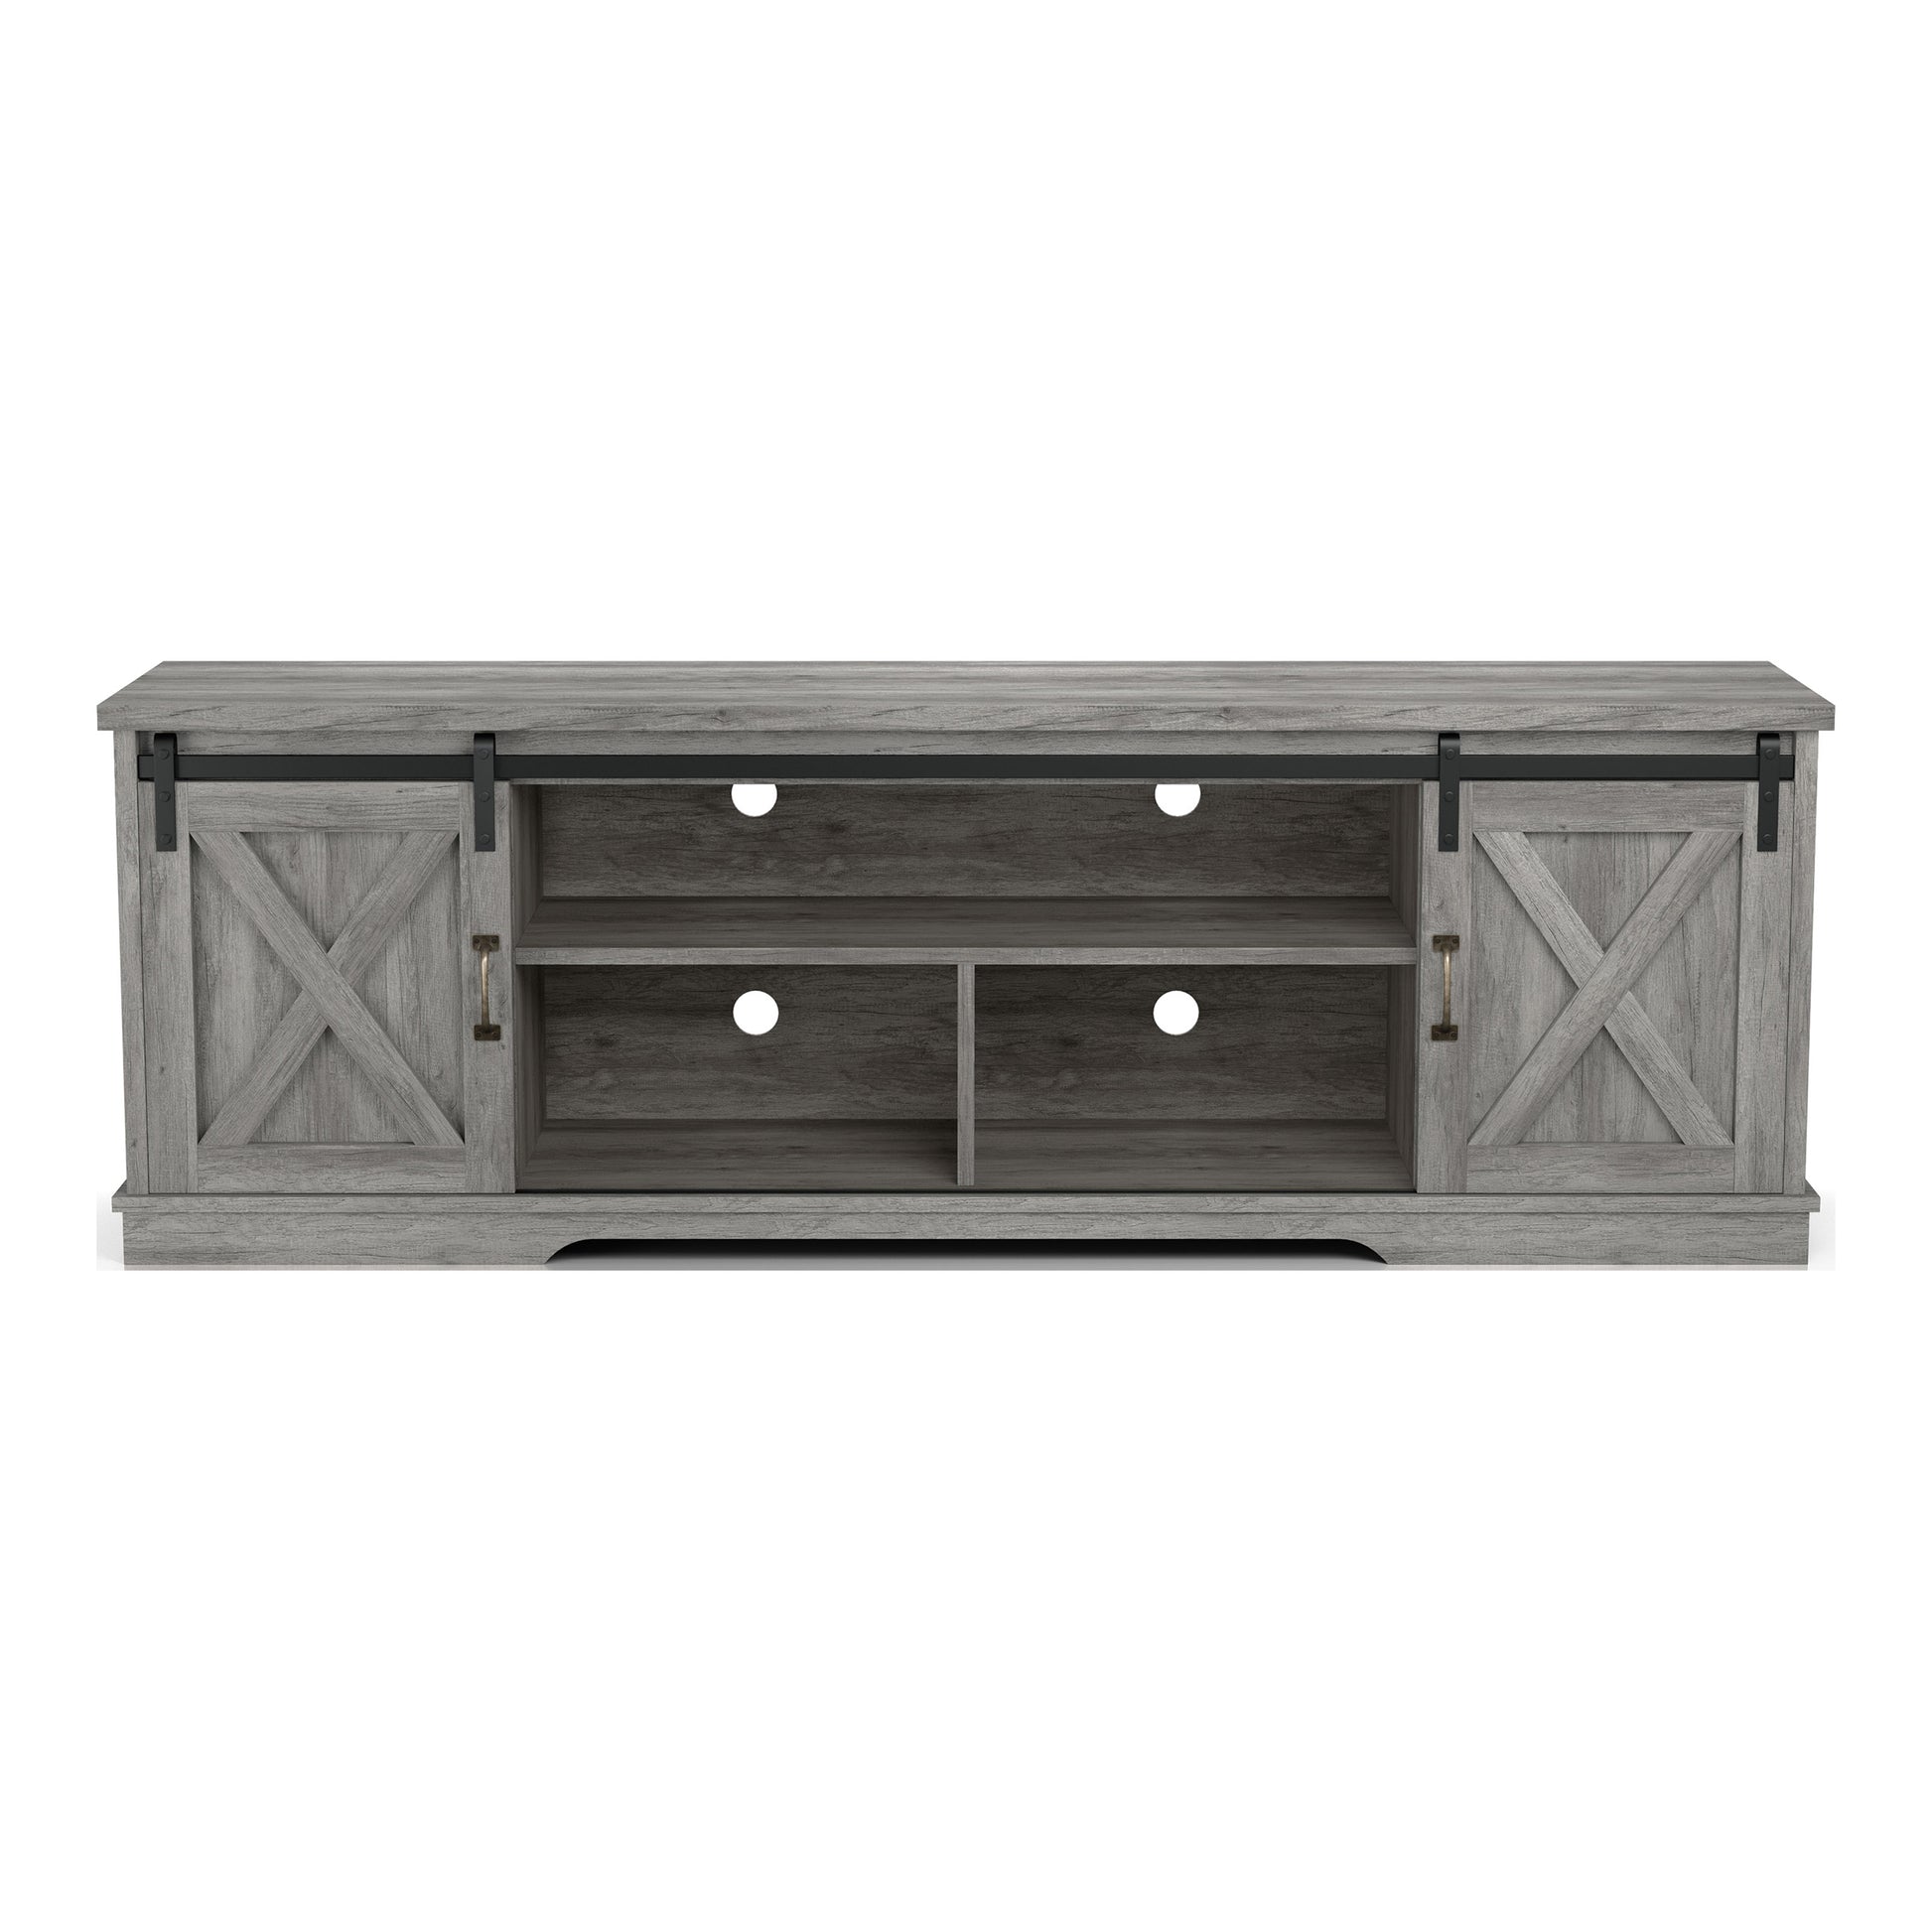 Front-facing stand only from a two-piece rustic vintage gray oak TV stand and pier entertainment set on a white background